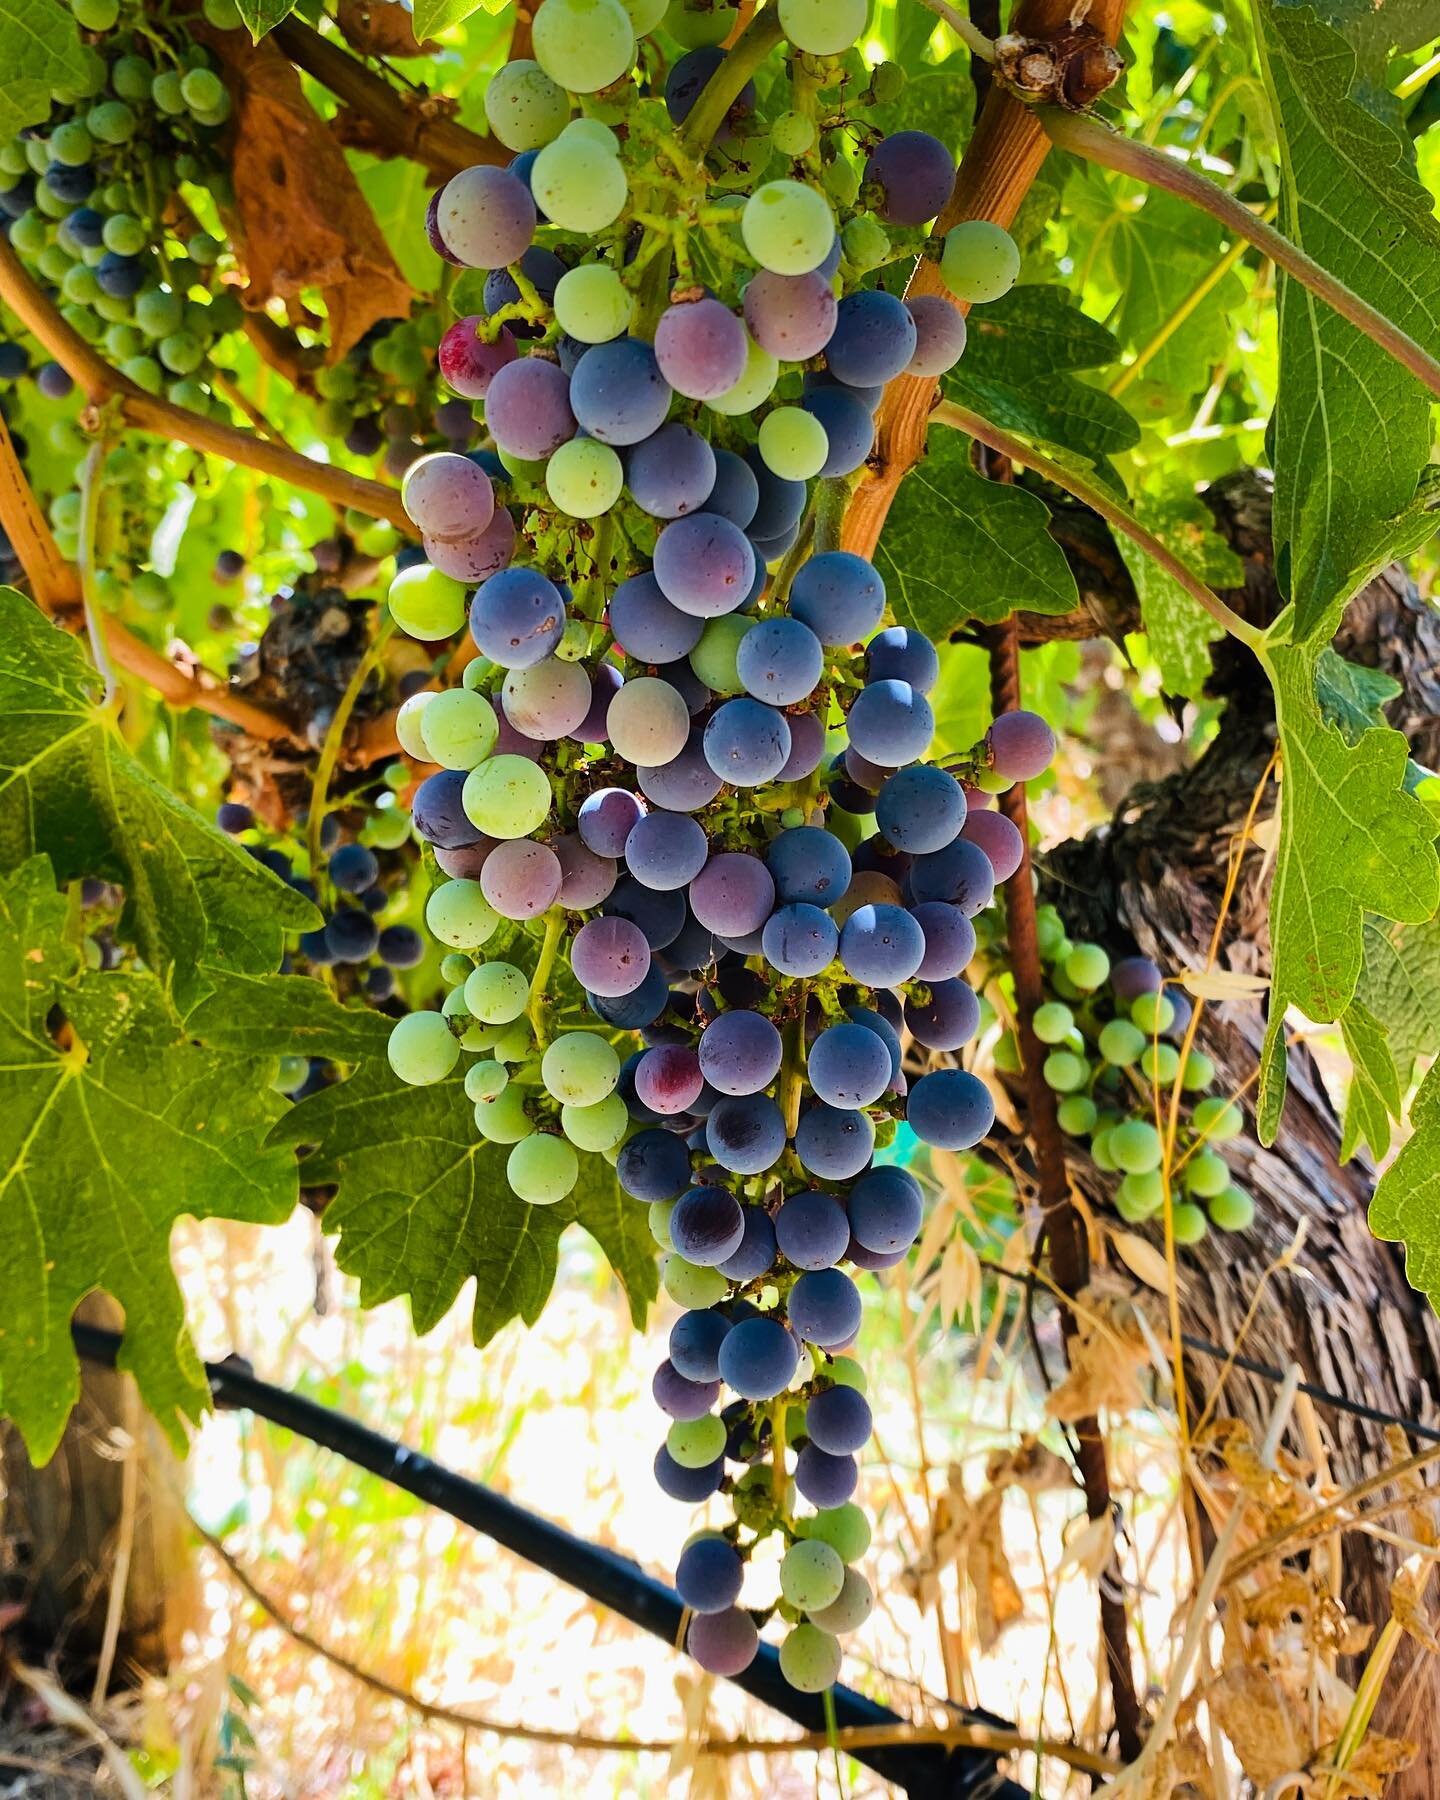 And just like that, we are on our way! Seems like just yesterday that this growing season got started, but veraison is already here. Time for the grapes to start sweetening and the pre-harvest winery cleaning to commence!
.
.
.
#harvest2022 #veraison